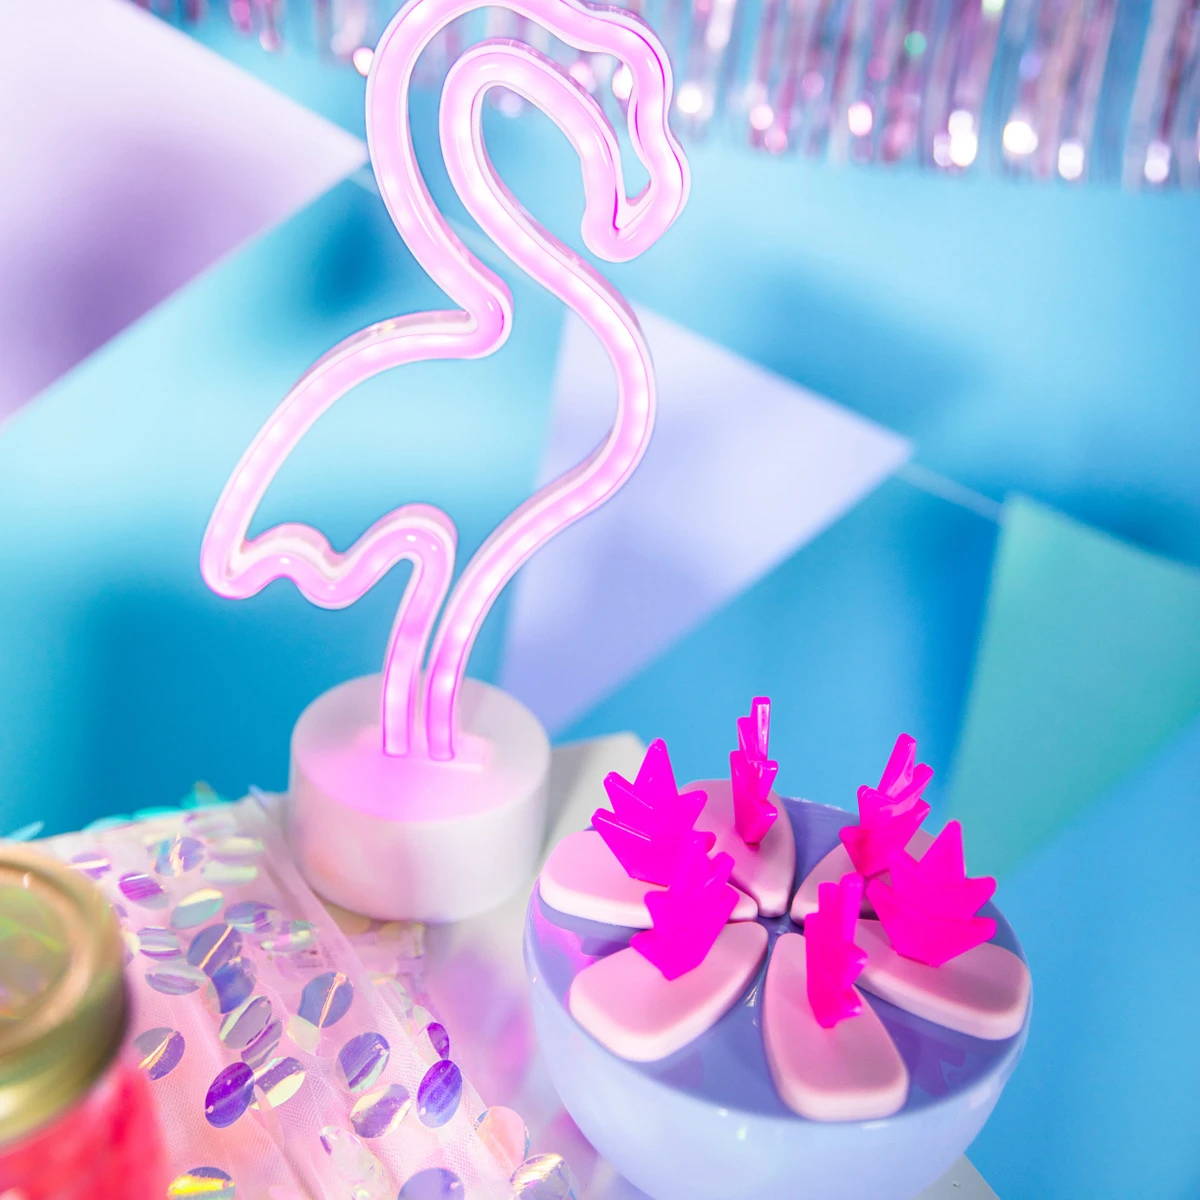 Flamingo neon light next to a bowl of flamingo-shaped drink stirrers, adding a vibrant pink glow to the setting.